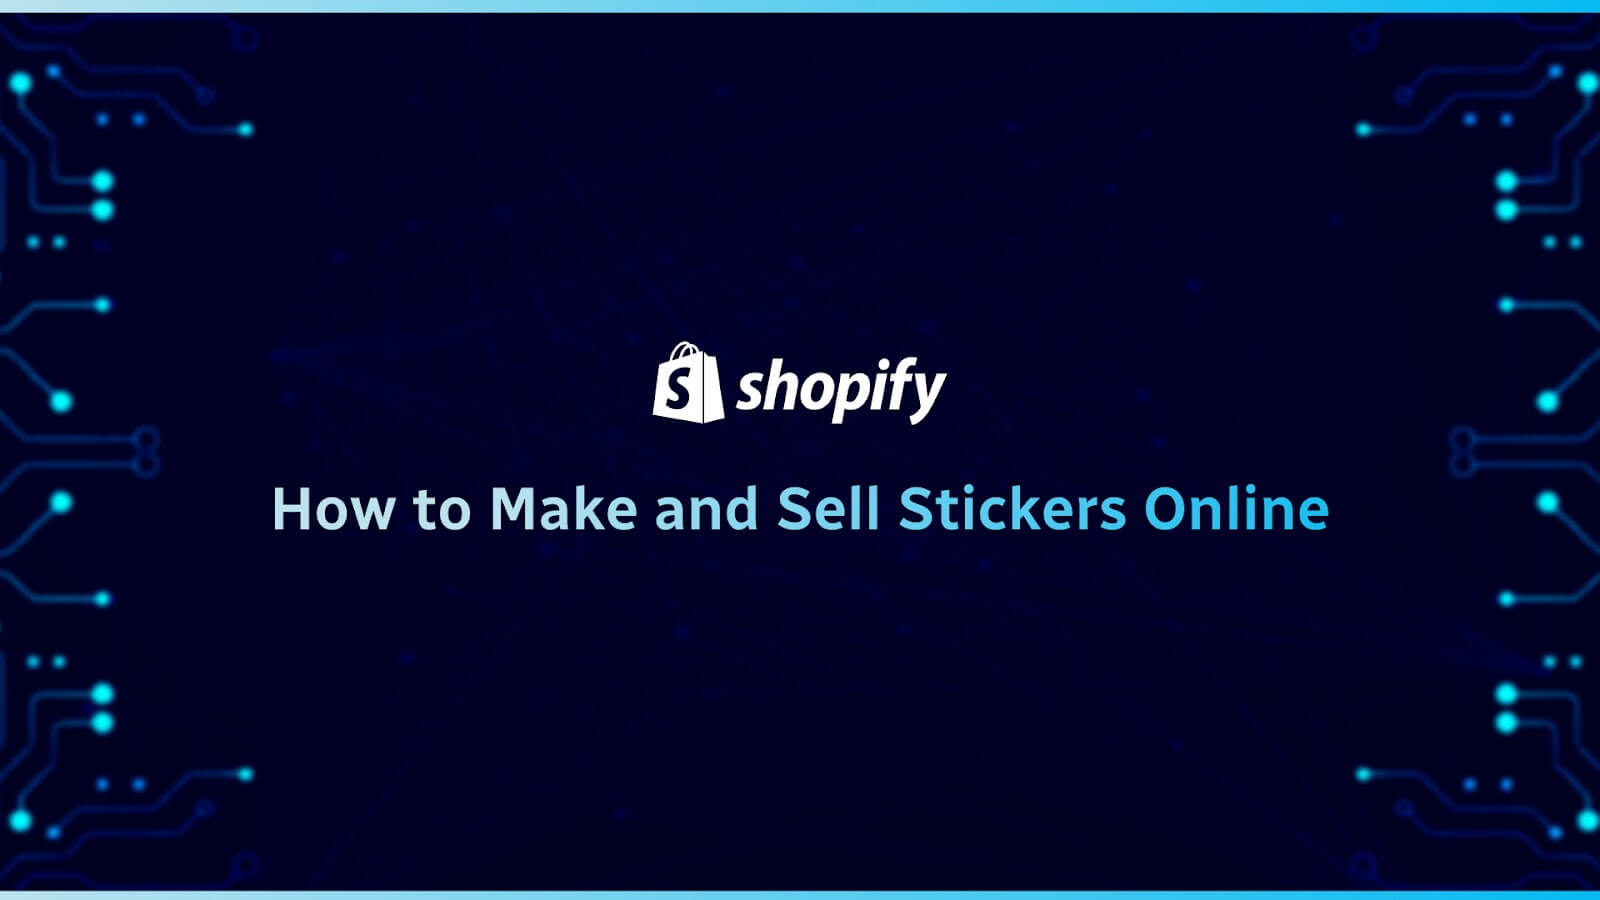 How to Make and Sell Stickers Online